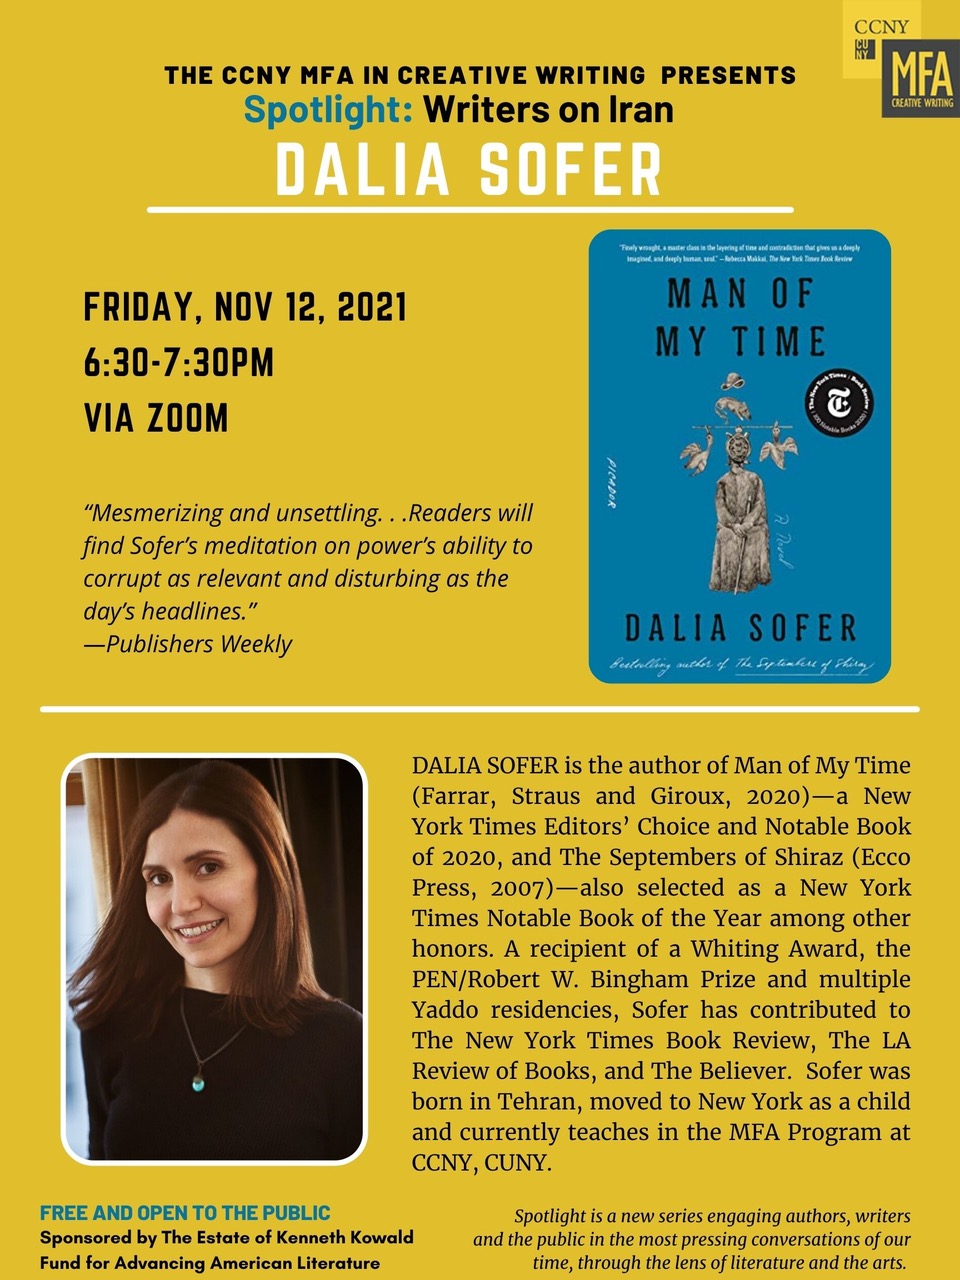 Acclaimed author Dalia Sofer discusses her novel, Man of My Time, for CCNY's MFA in Creative Writing's Spotlight series